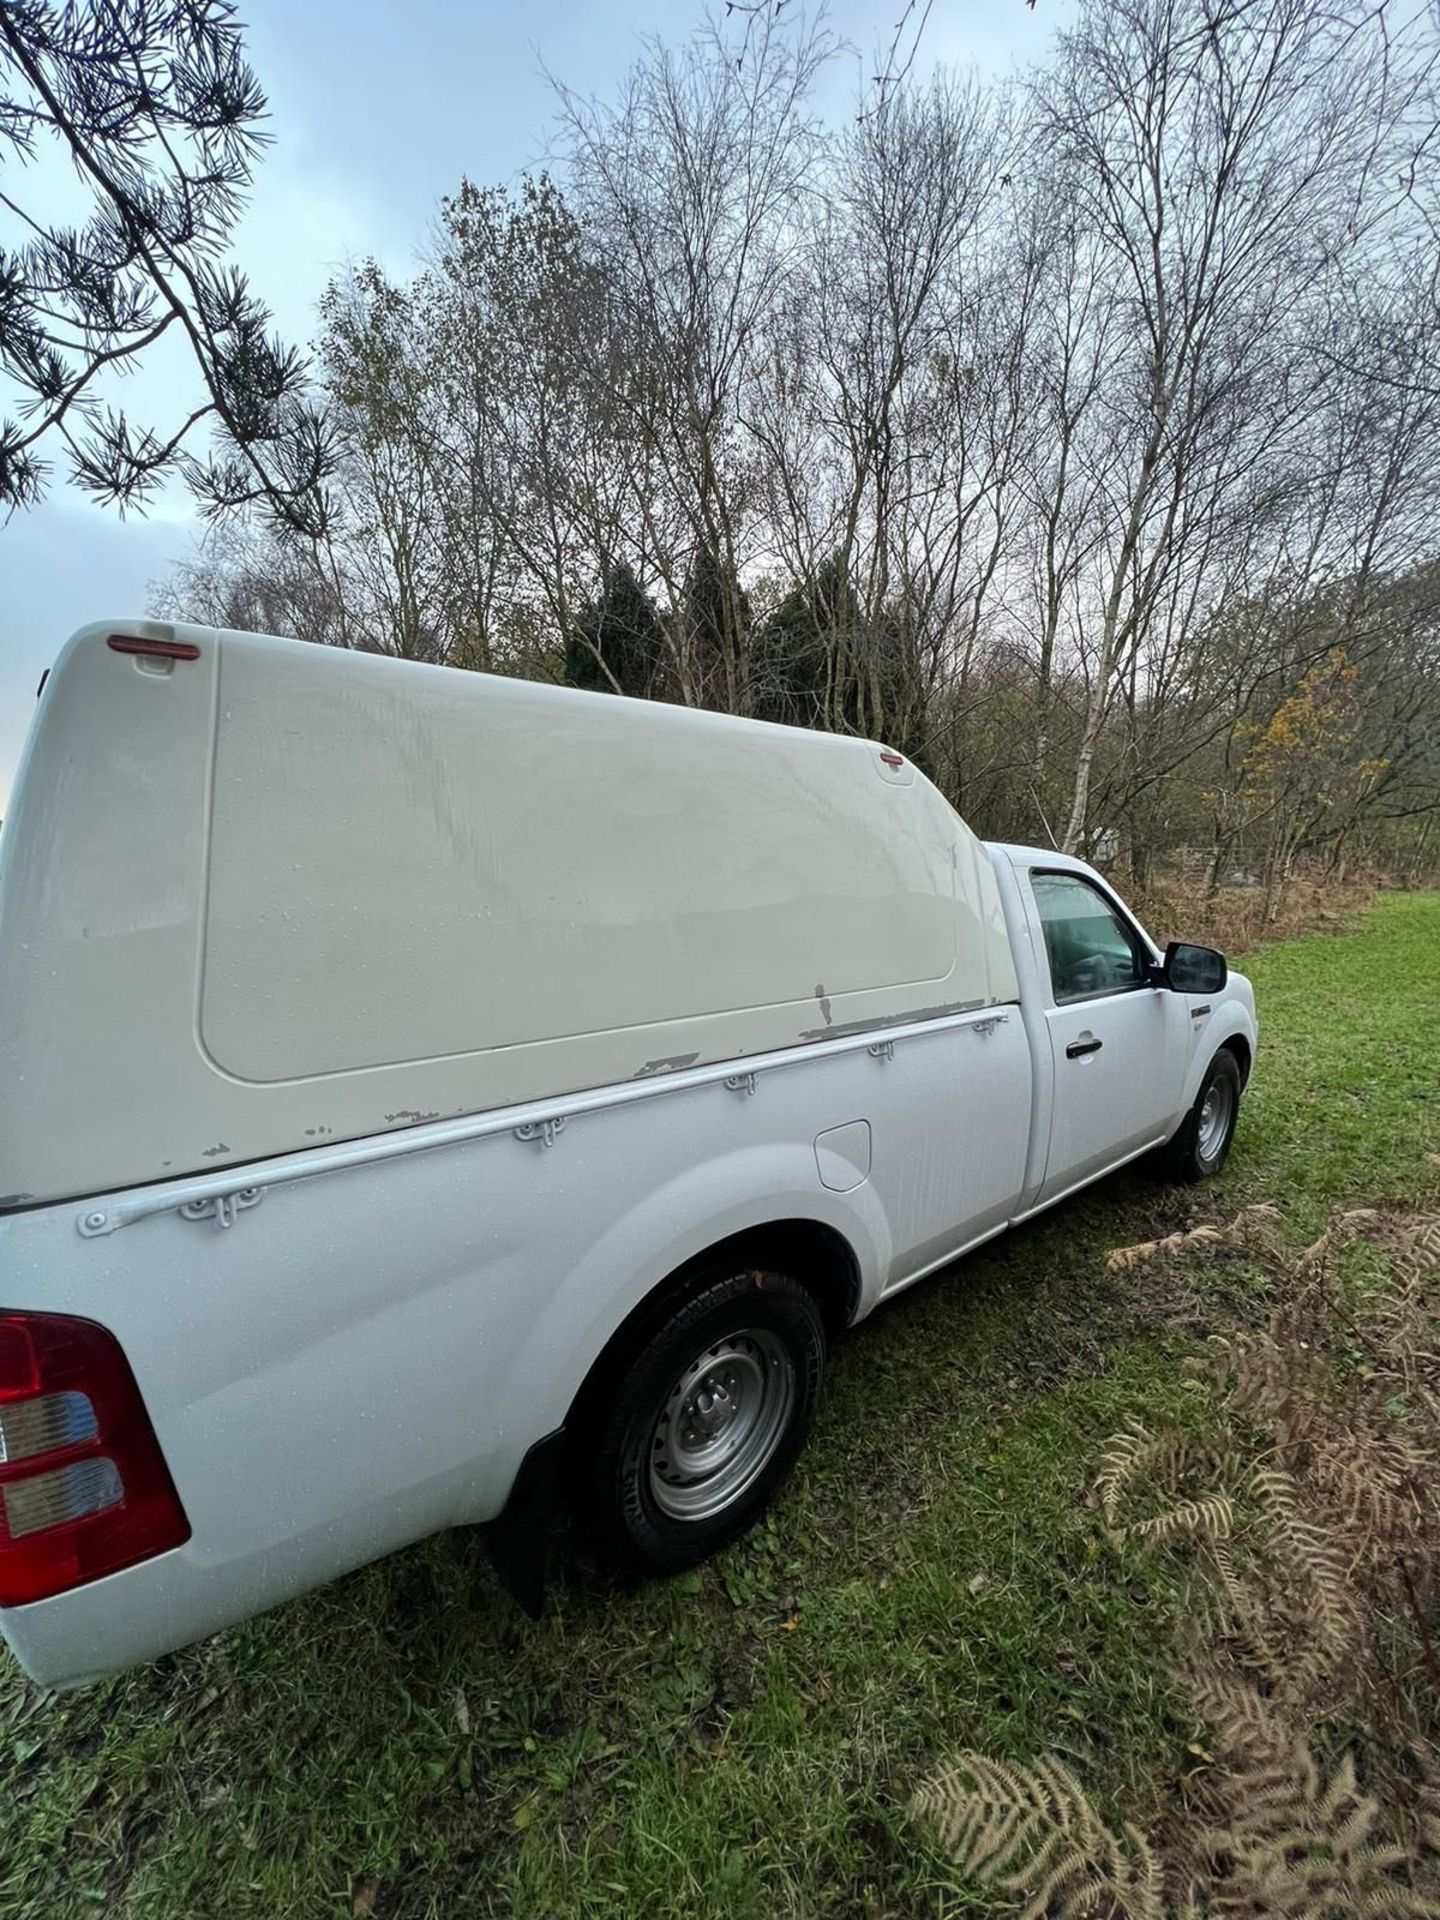 FORD RANGER SINGLE CAB PICKUP TRUCK 2WD EX NHS - Image 12 of 15